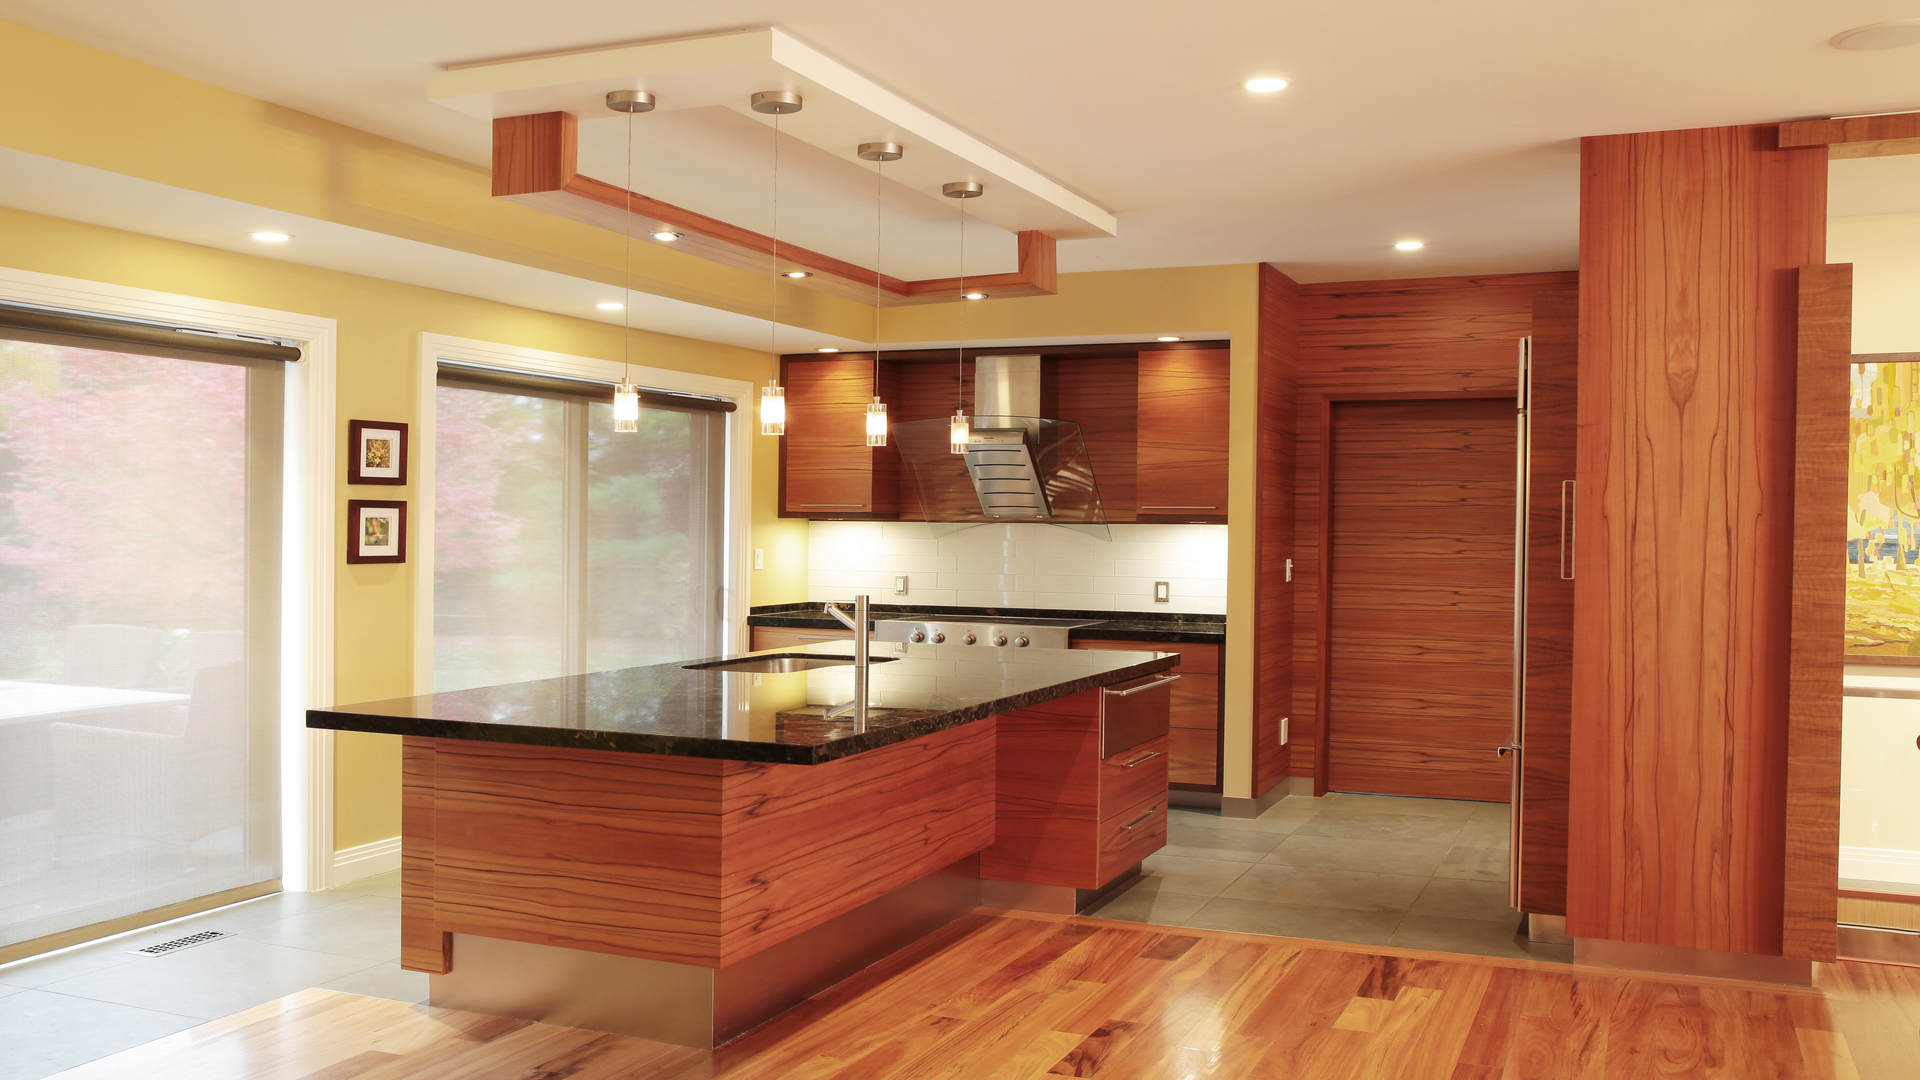 Hot Press Exotic Wood Veneering for Residential & Commercial Spaces: Walls, Shelving & Cabinetry